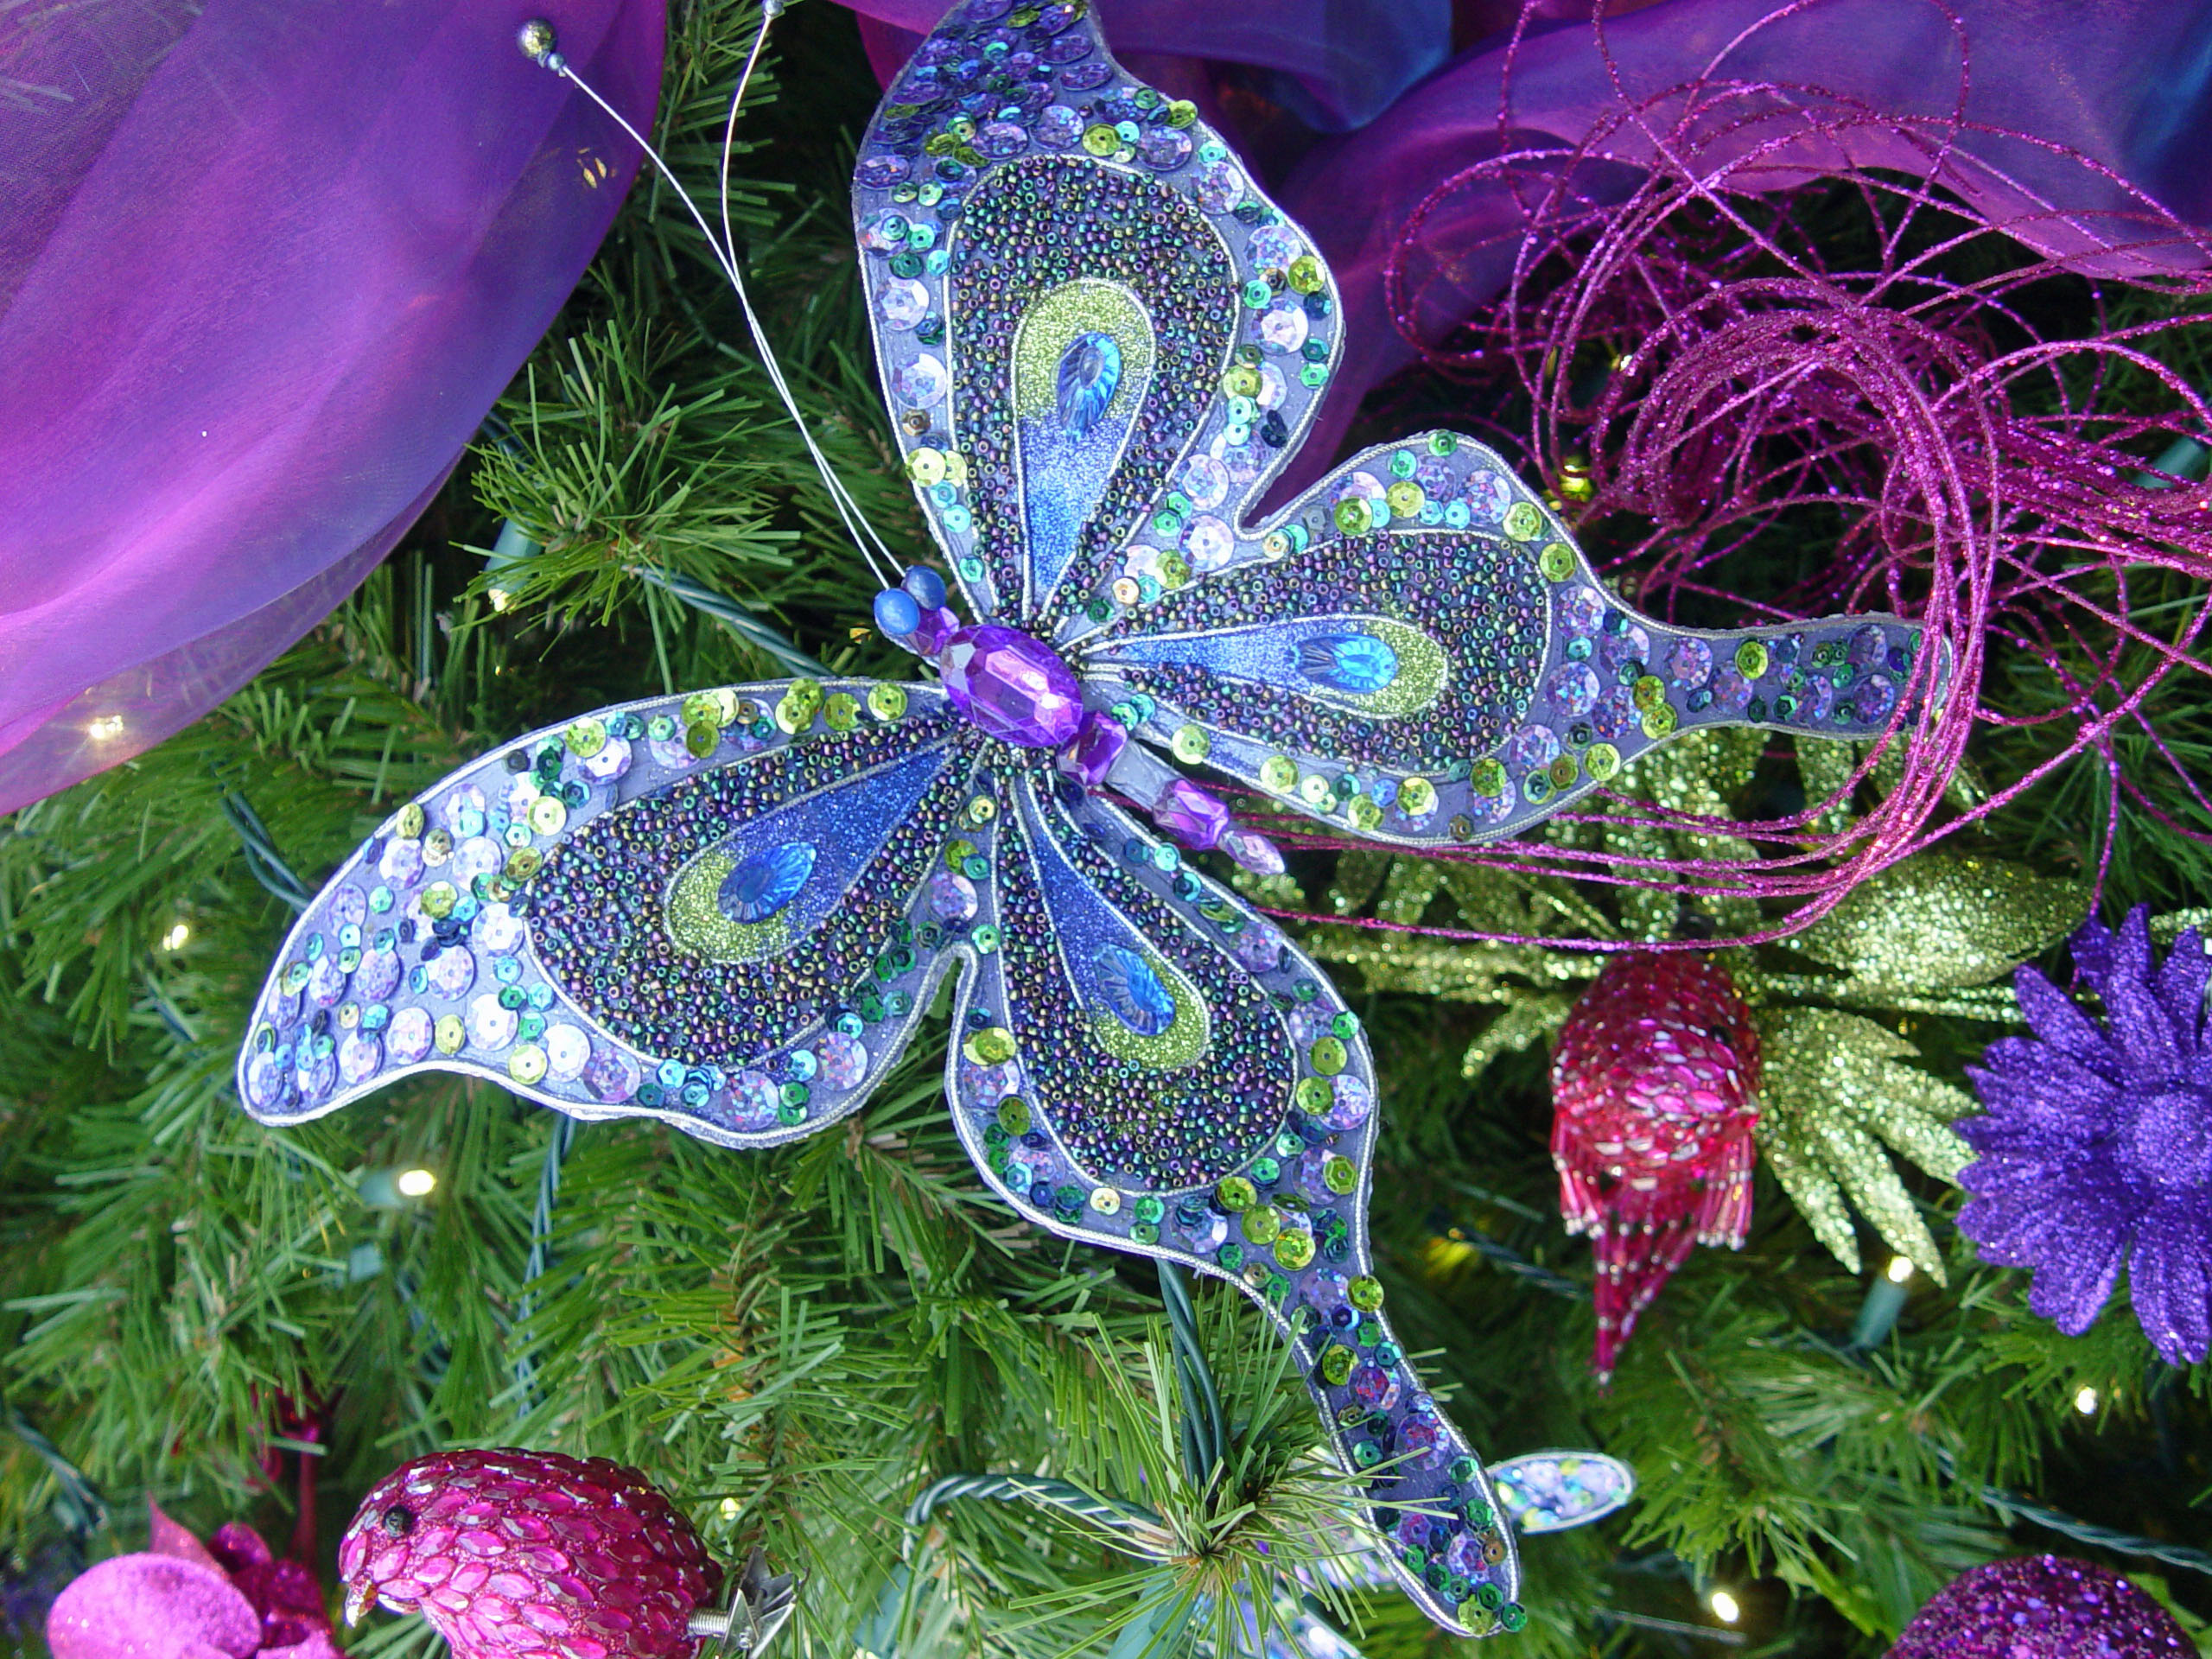 Perfect Christmas tree topper = a butterfly!, Lewis Ginter